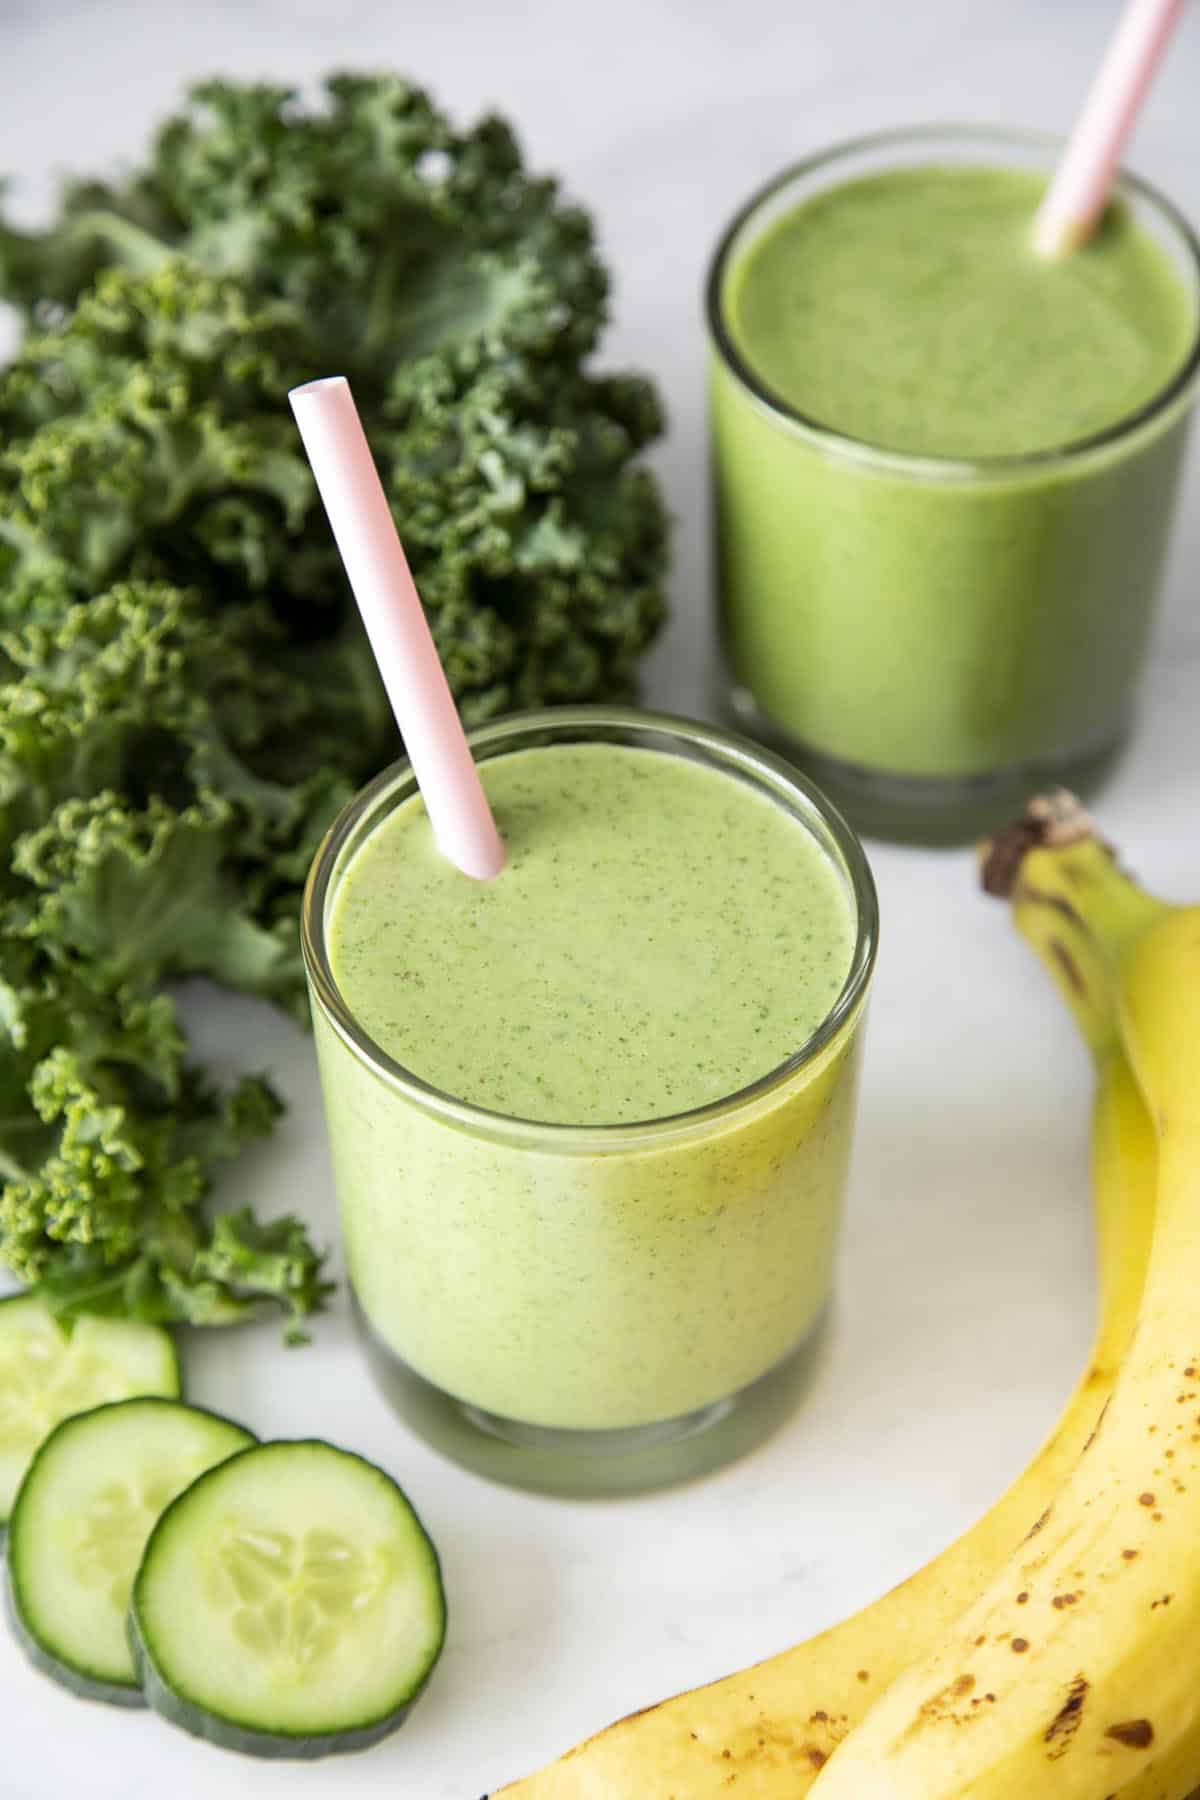 ¾ view of green smoothie in 2 glasses with pink straws next to banana, kale and cucumber slice.